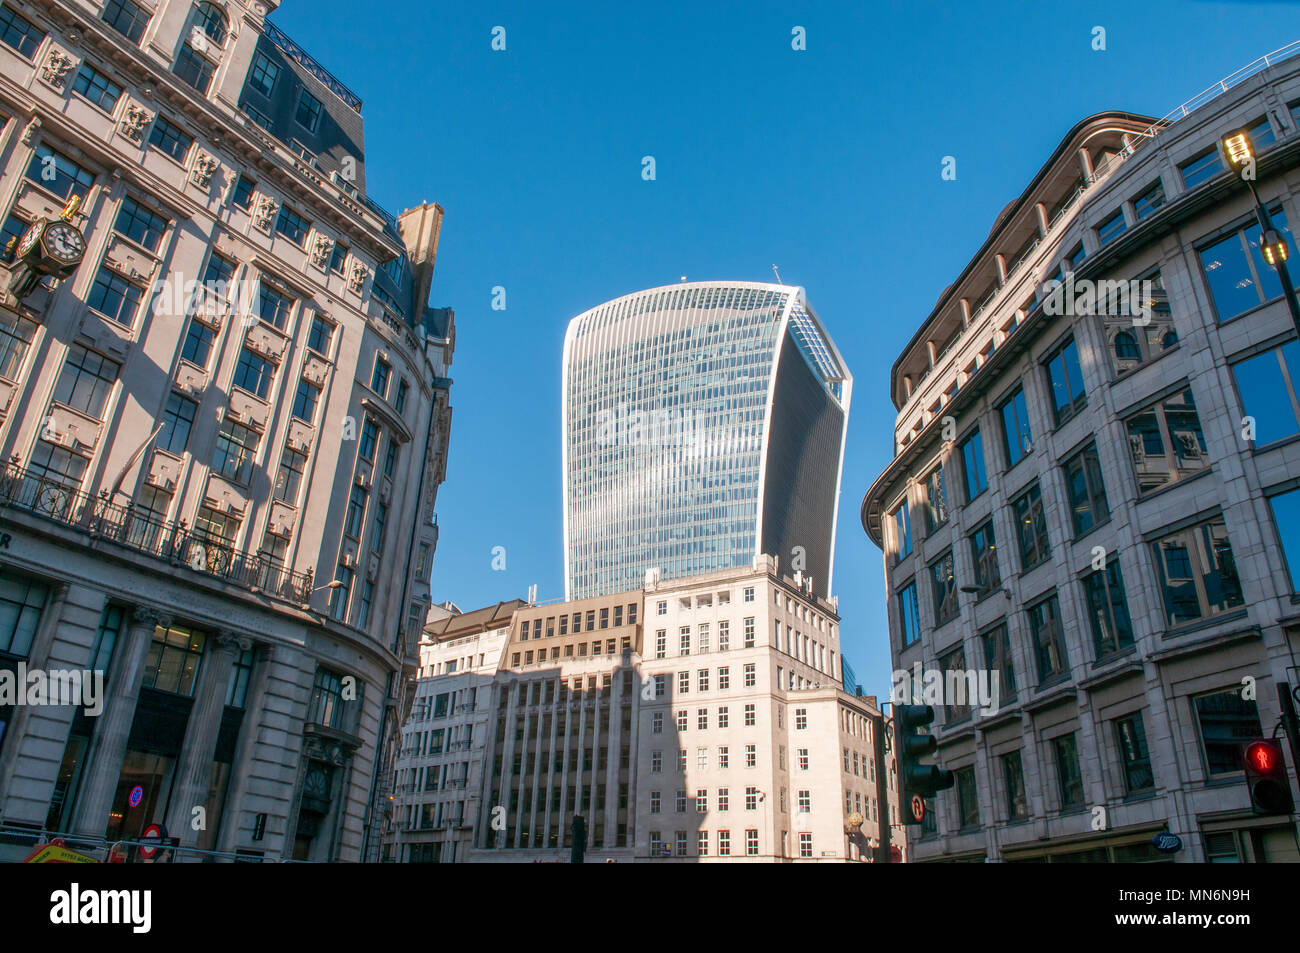 Street scene in London with the Walkie Talkie in the background. Stock Photo